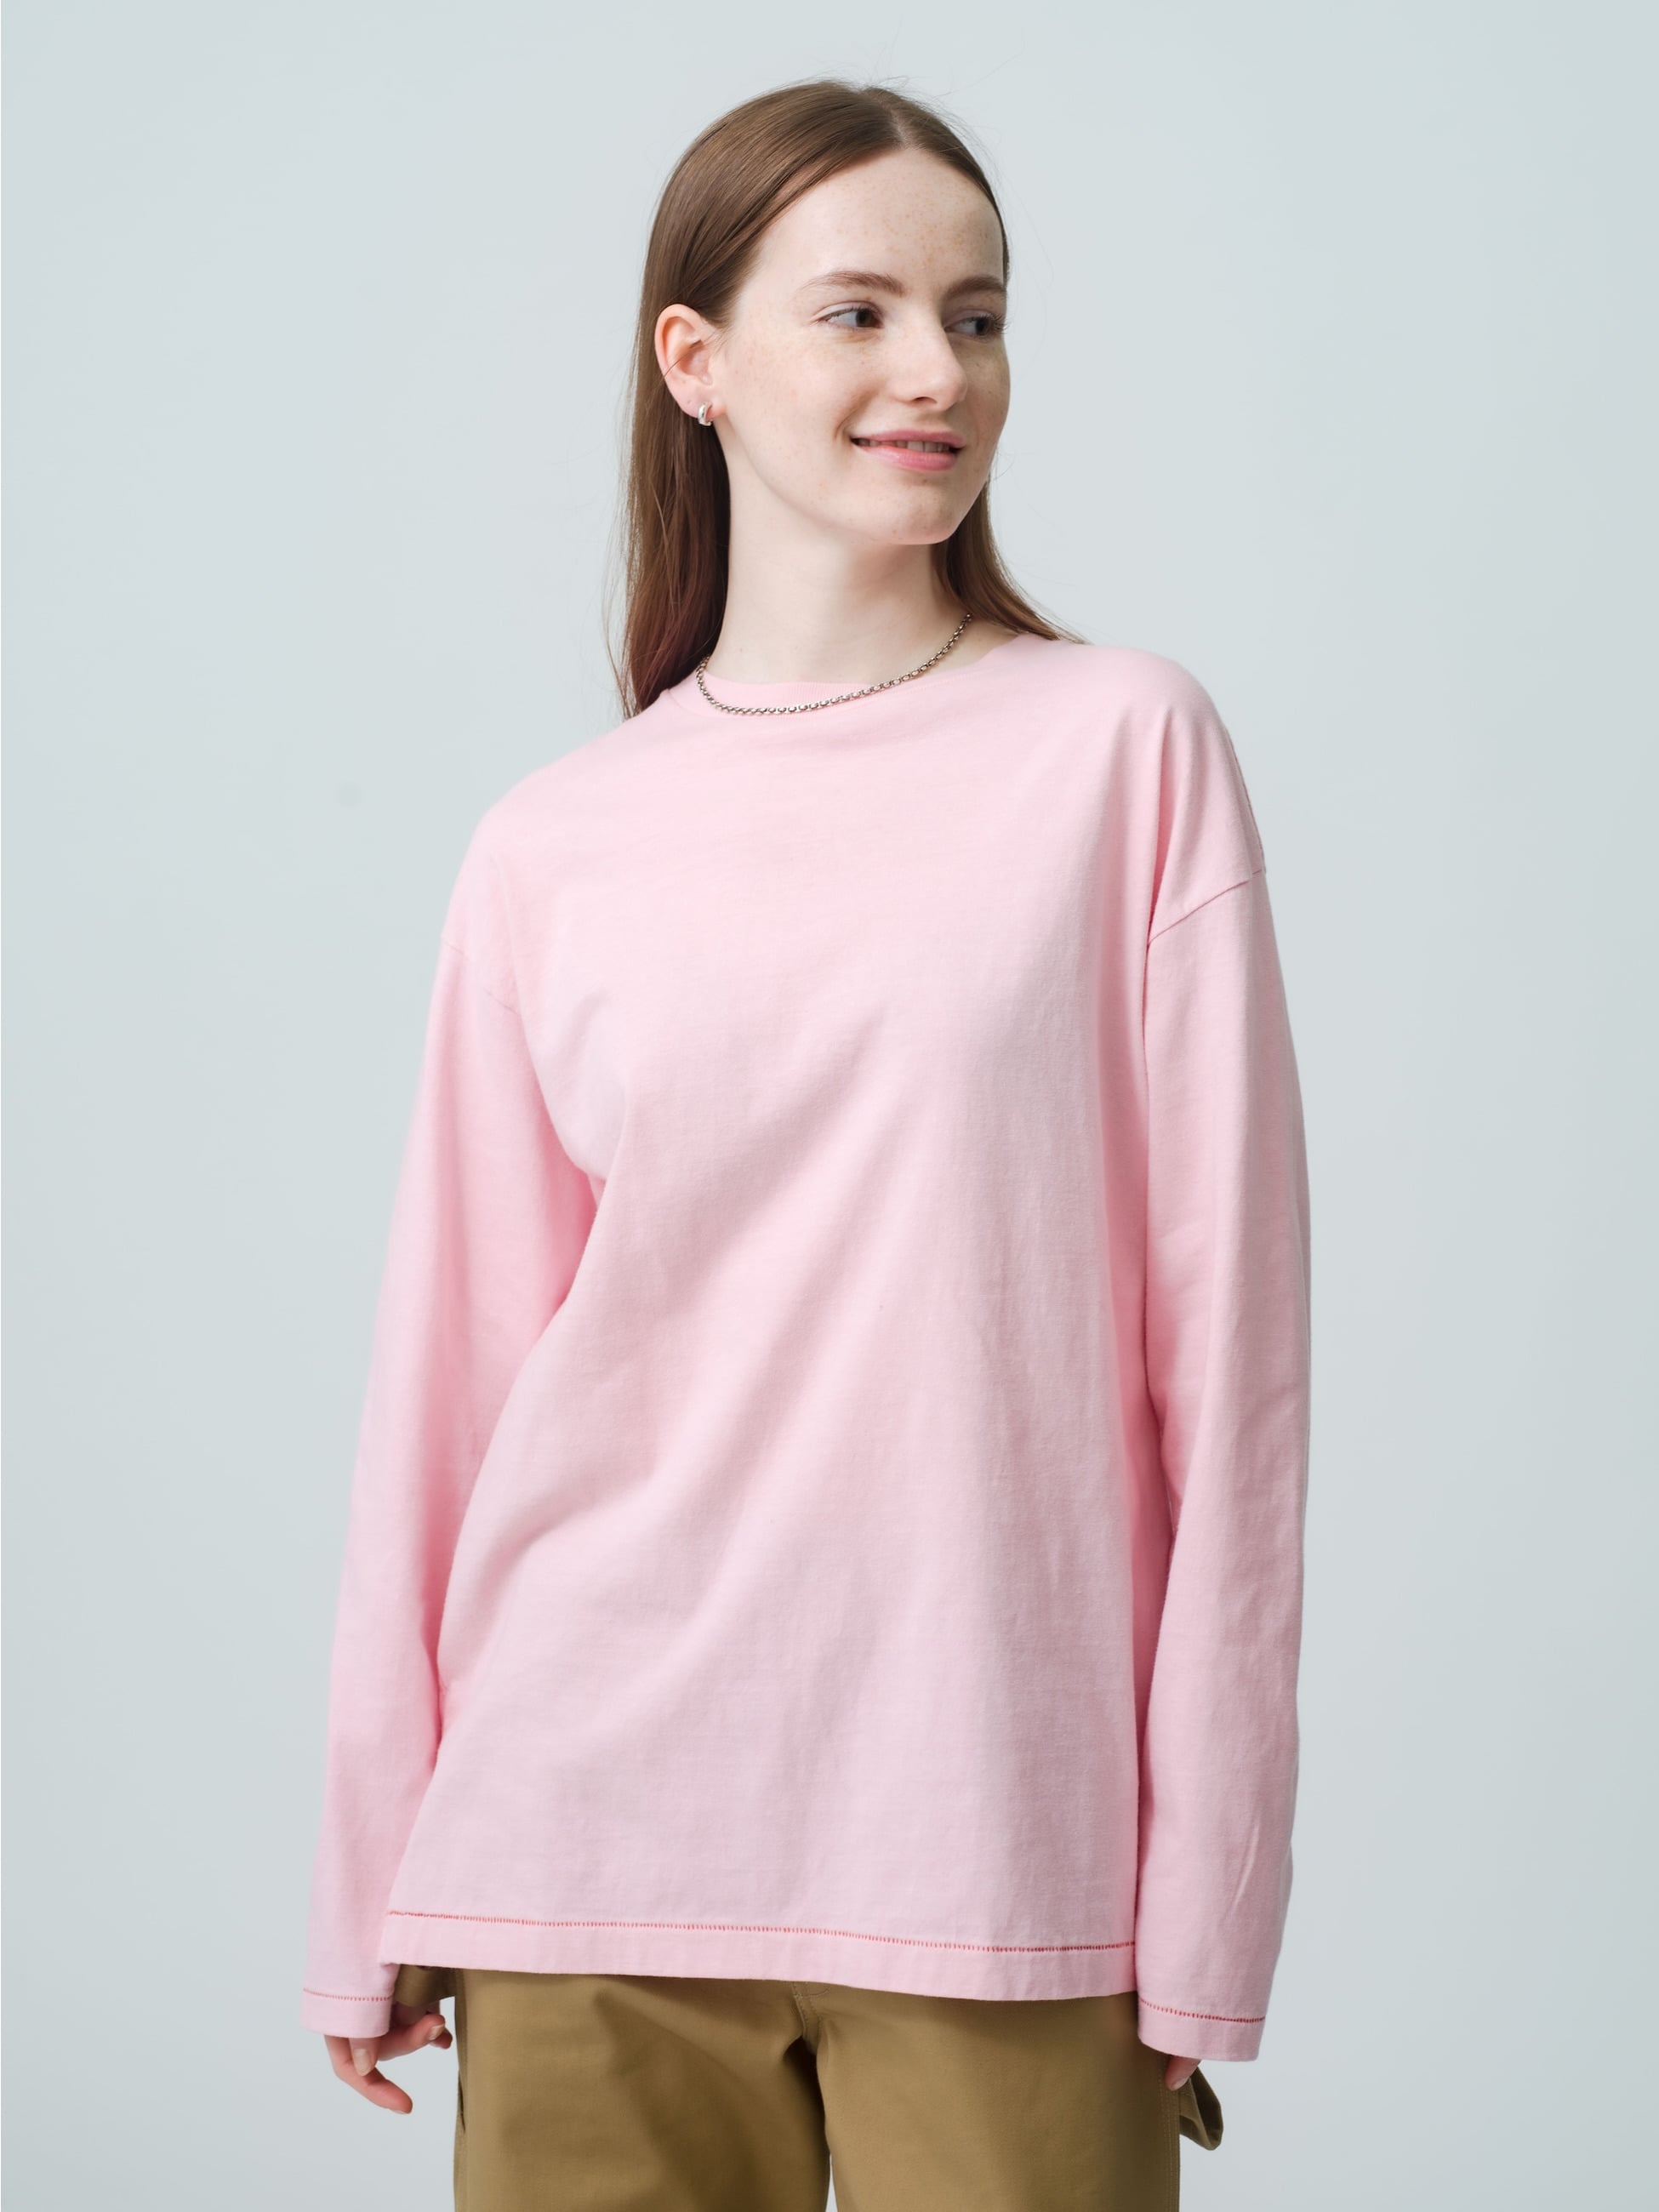 Ollier Long Sleeve Tee (white / pink / navy) 詳細画像 pink 1